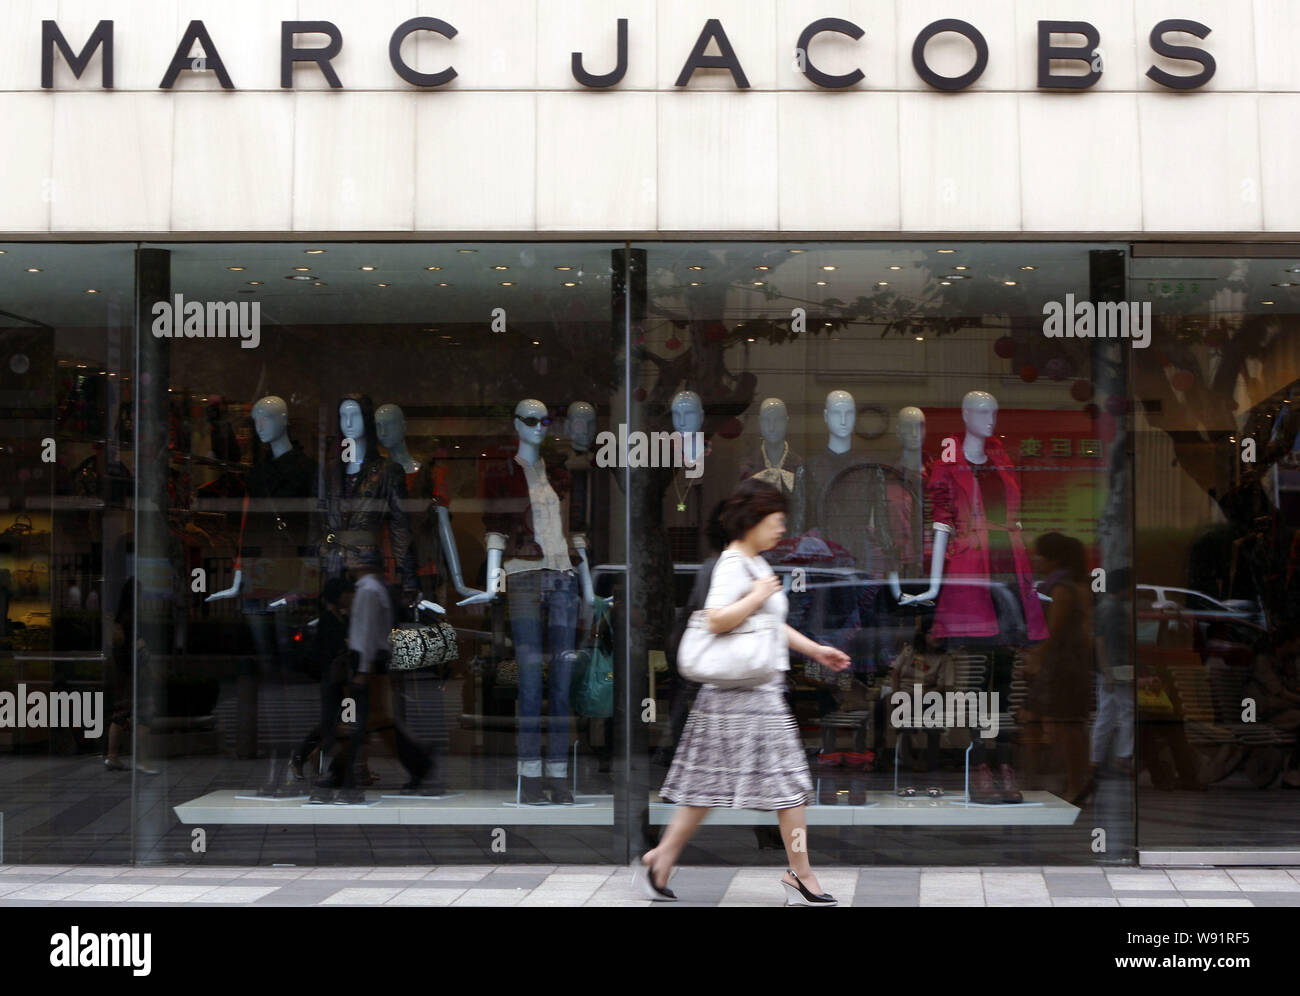 Mall at Green Hills lands Marc Jacobs, Retail